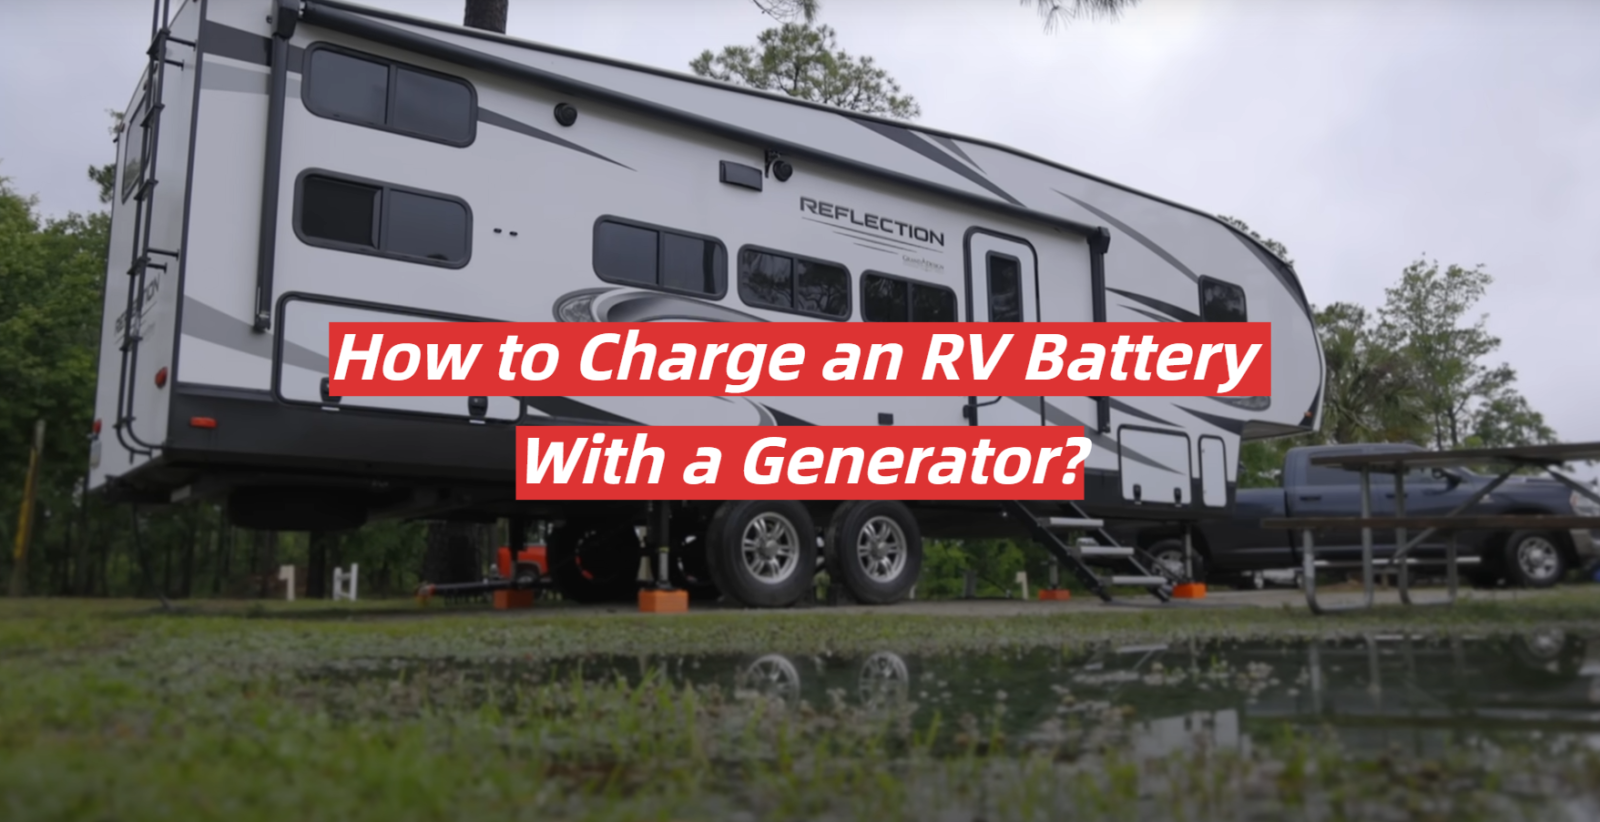 How to Charge an RV Battery With a Generator?